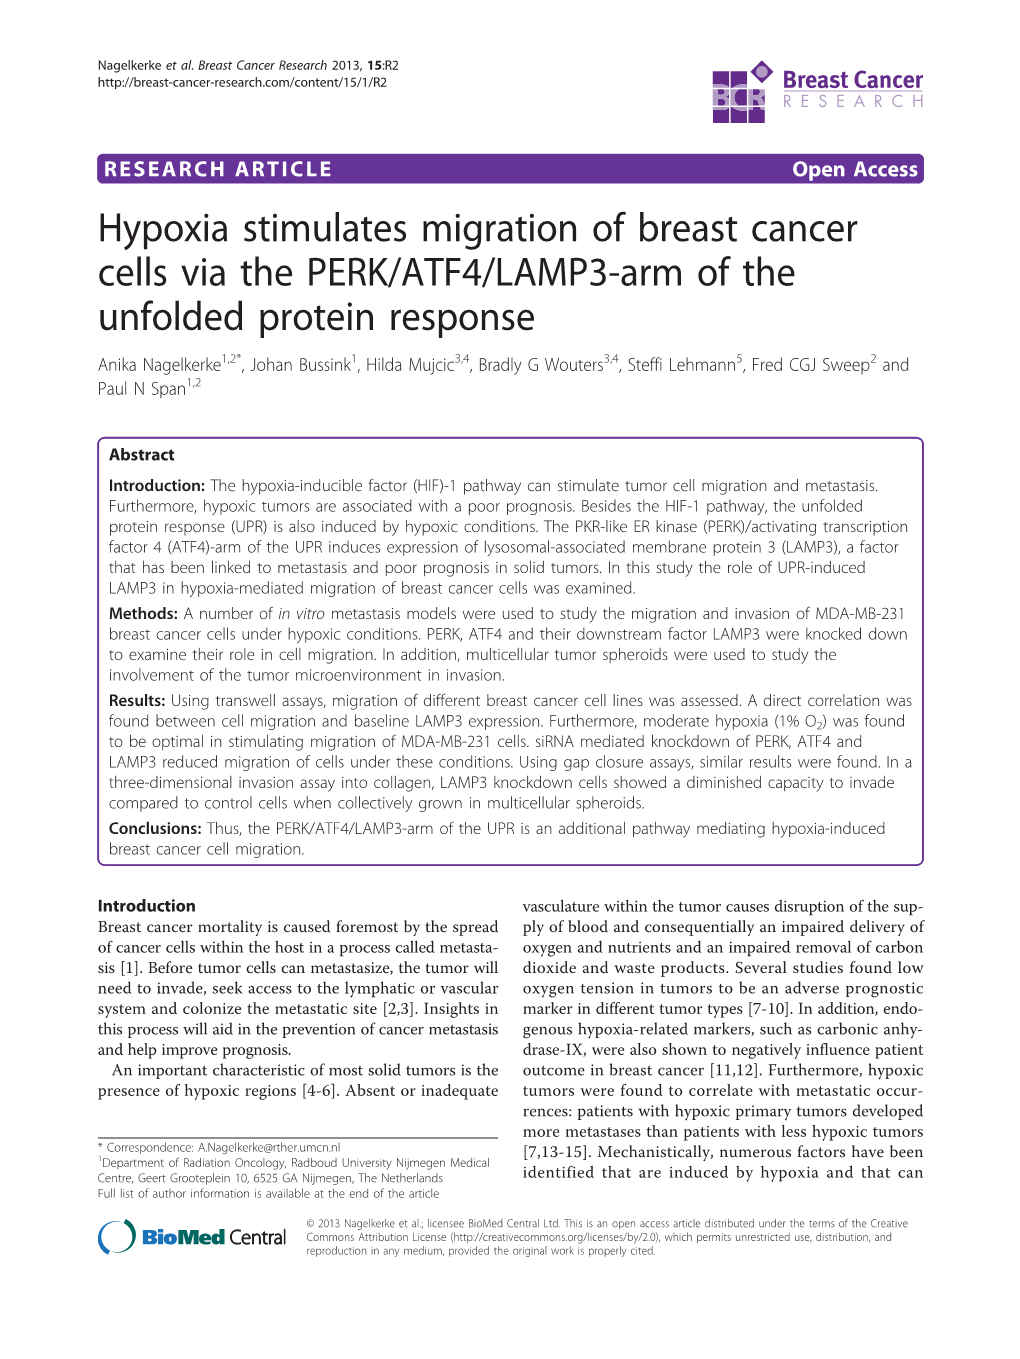 Hypoxia Stimulates Migration of Breast Cancer Cells Via the PERK/ATF4